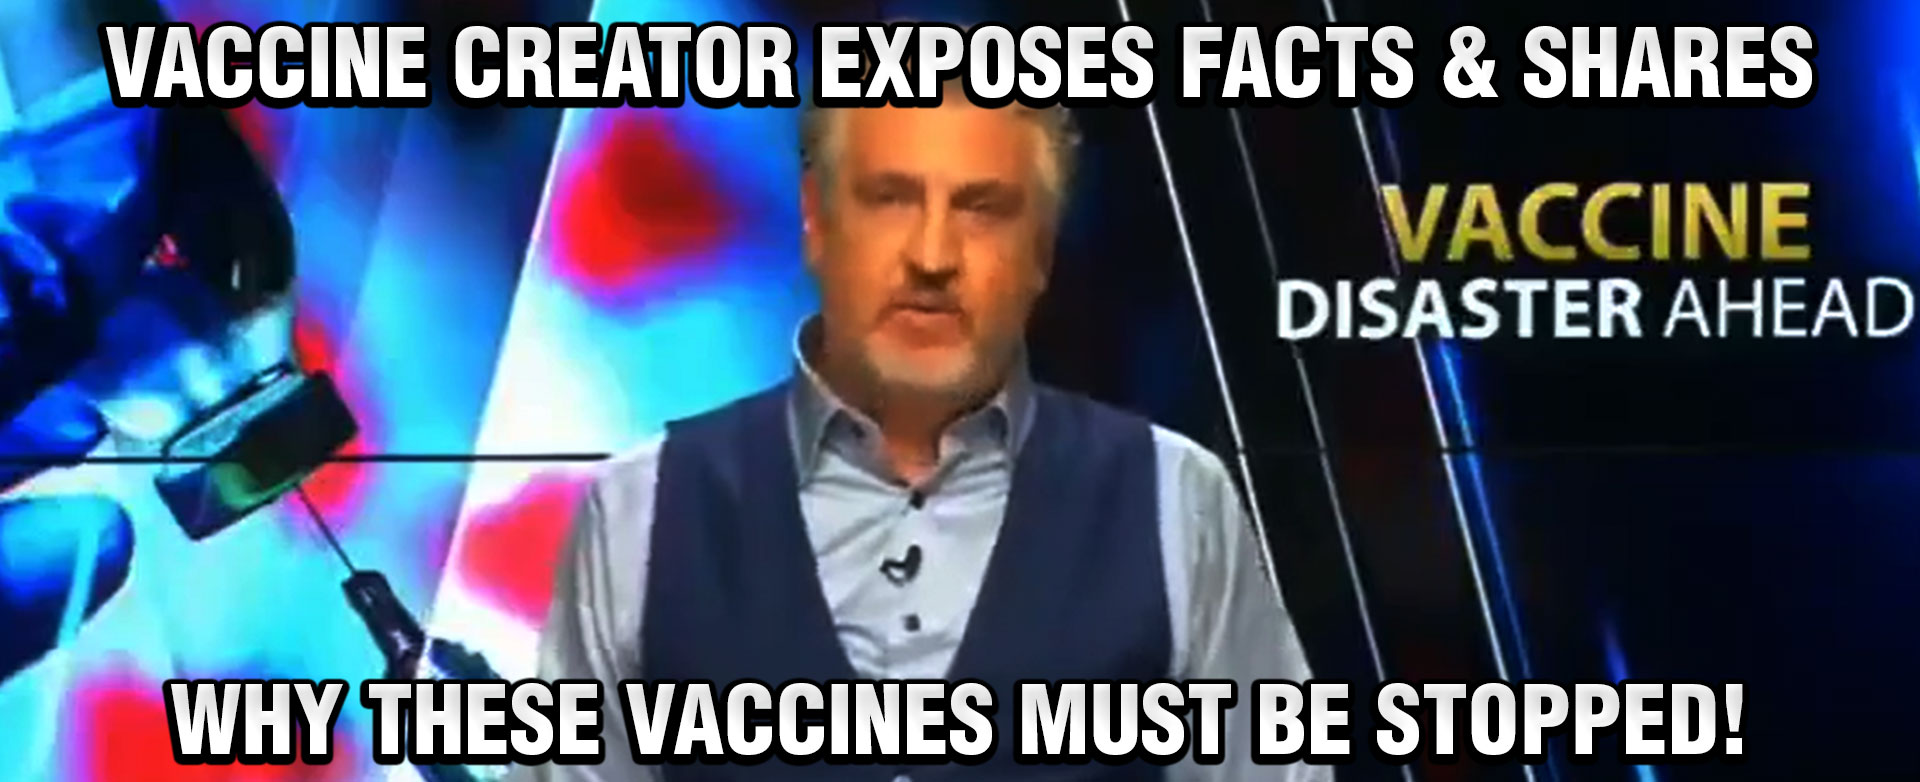 MyPatriotsNetwork-Vaccine Creator Exposes Facts & Shares Why These Vaccines Must Be Stopped!